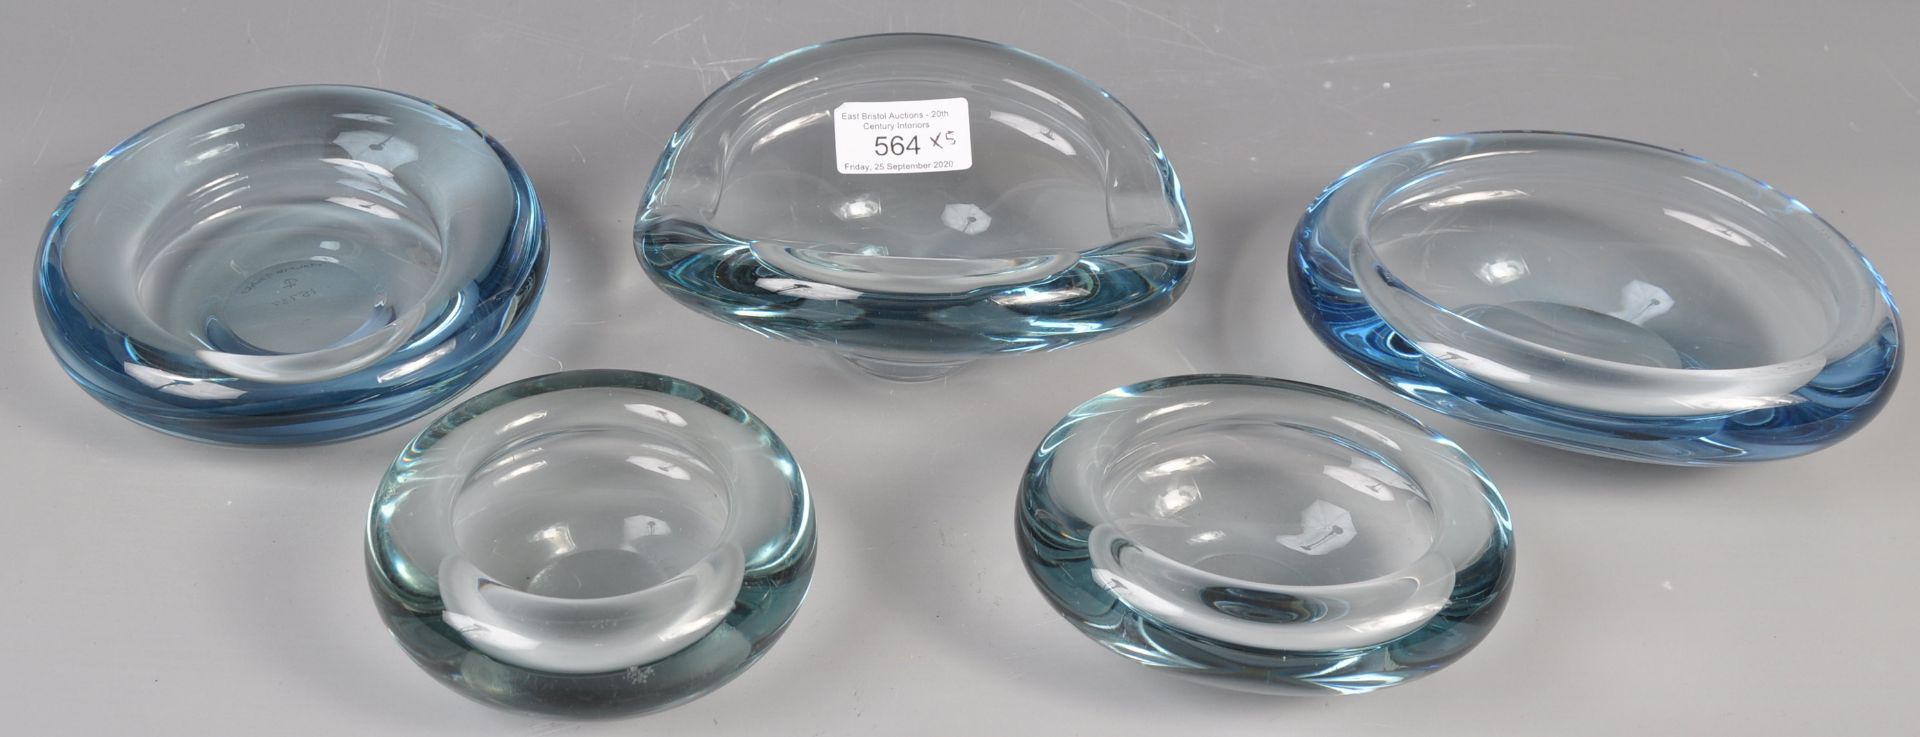 COLLECTION OF DANISH GLASS HOLMEGAARD BOWLS BY P. LUTKEN